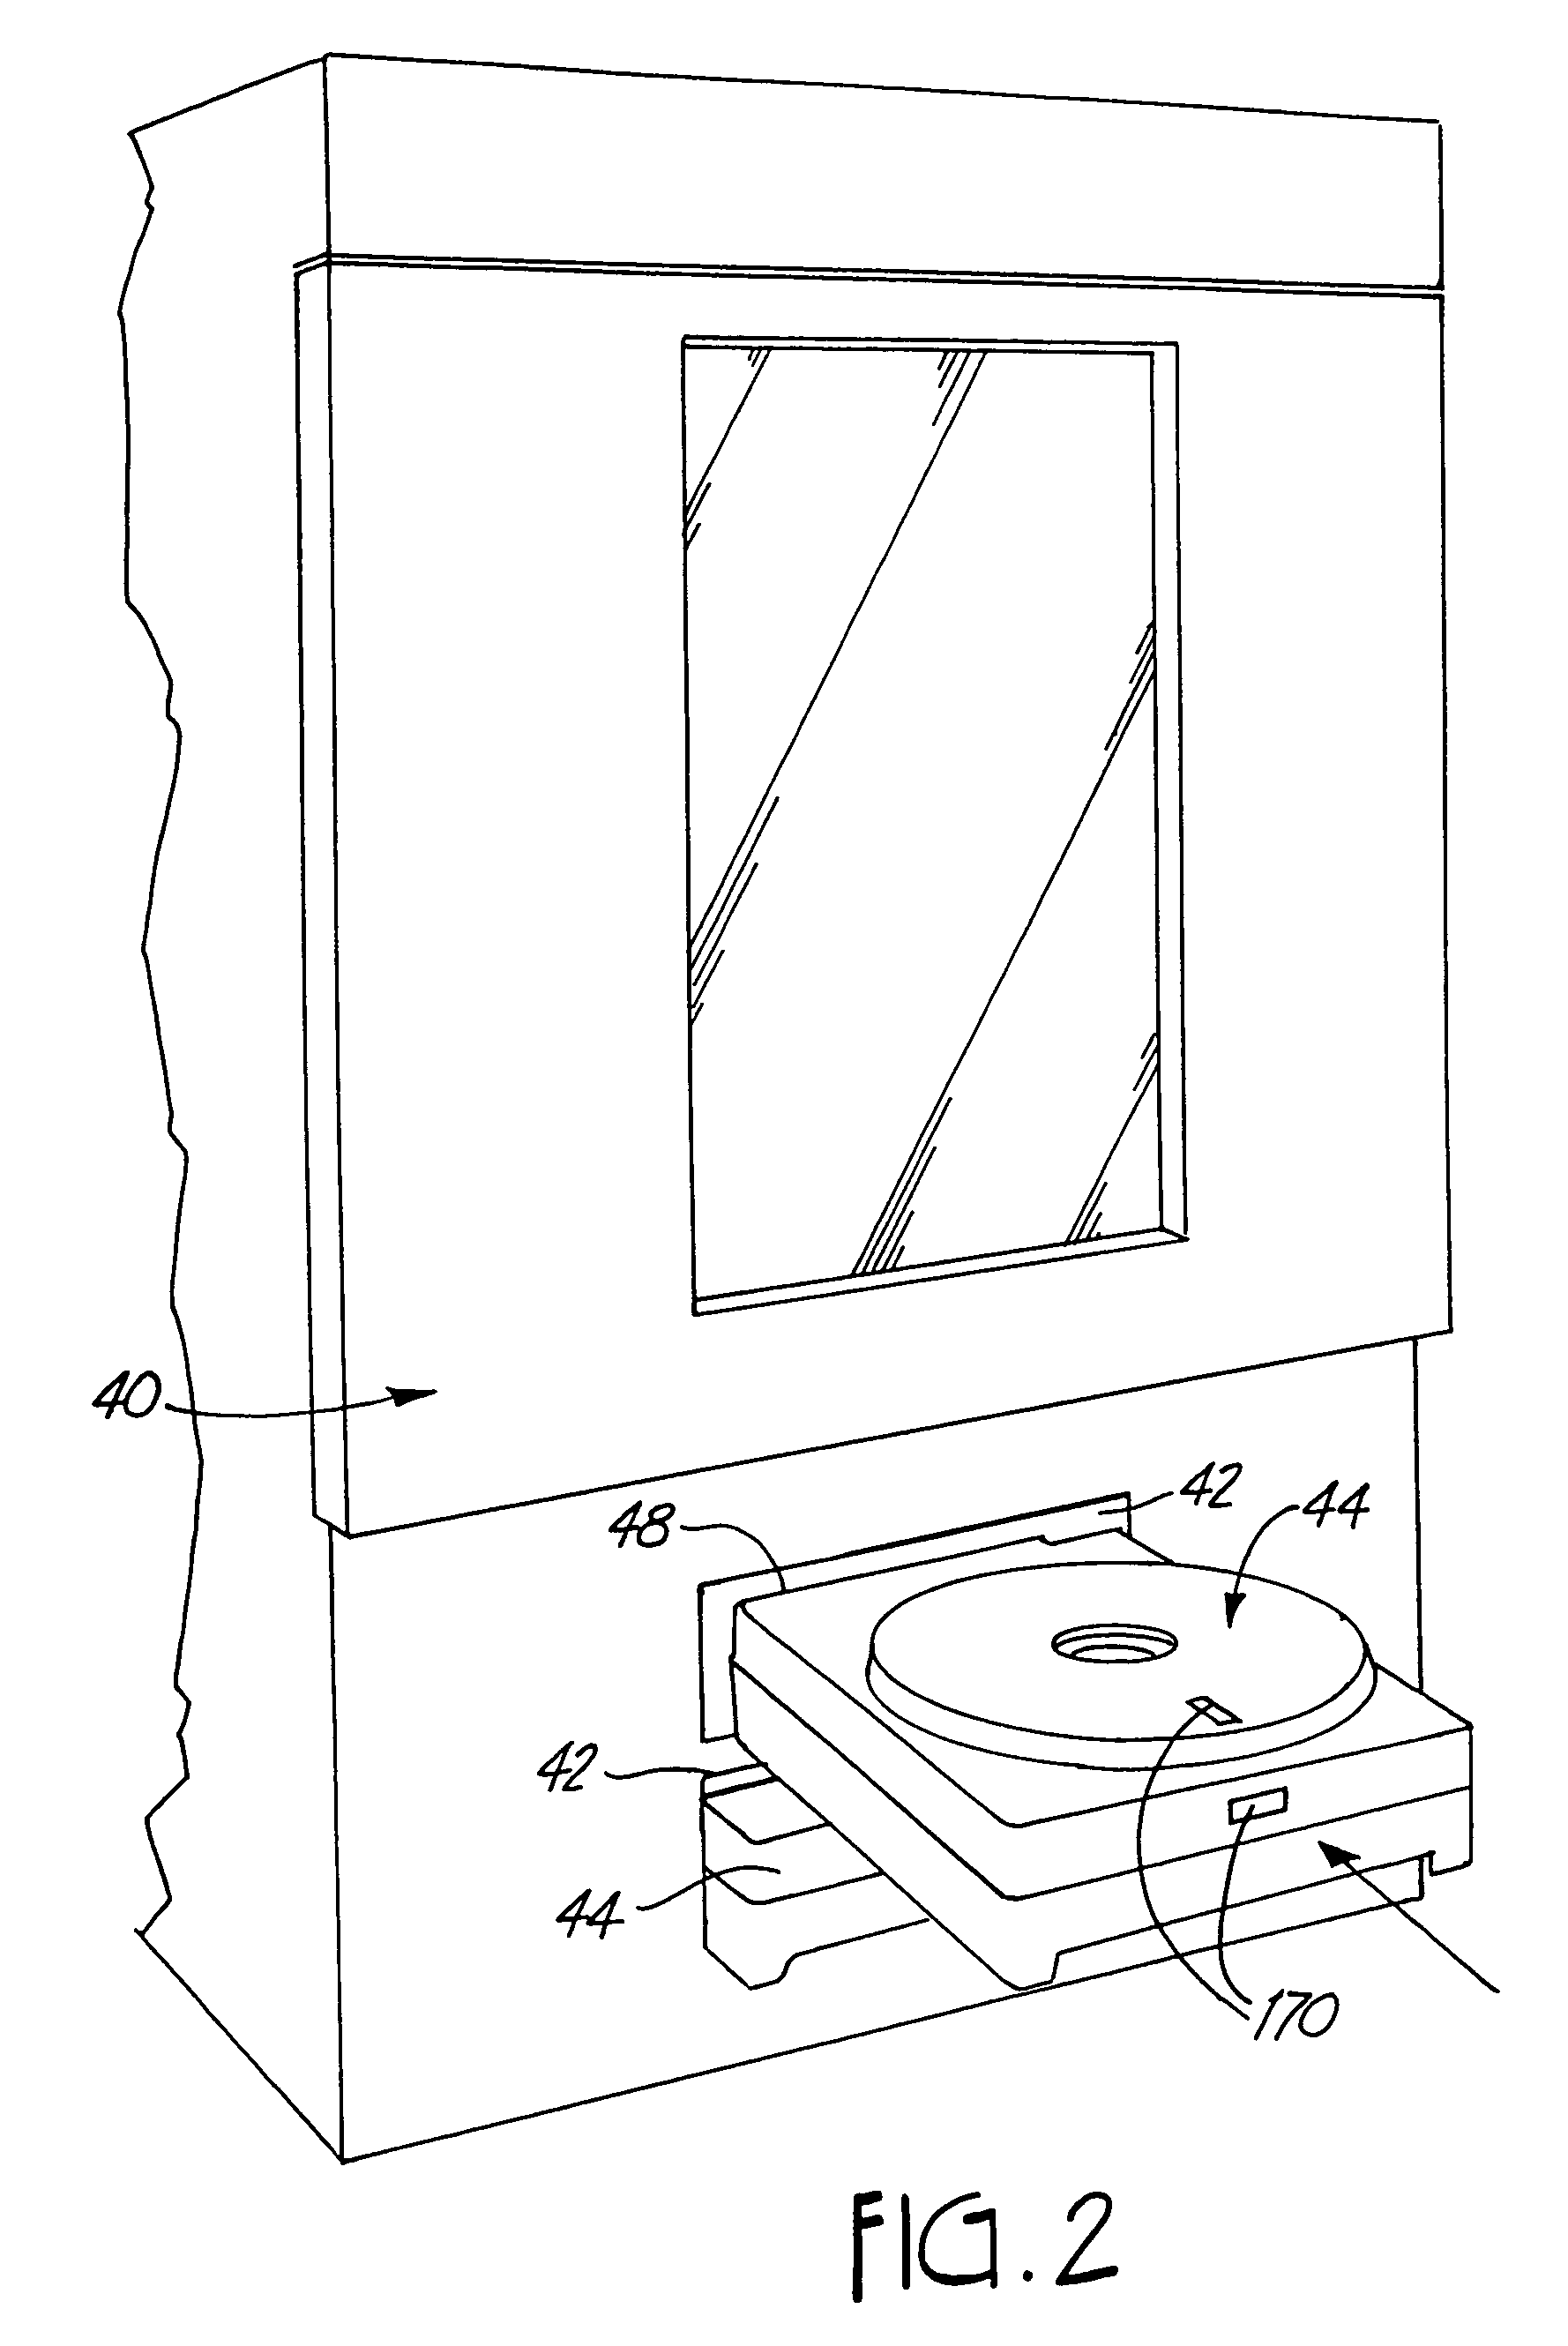 Method for loading filament in an extrusion apparatus